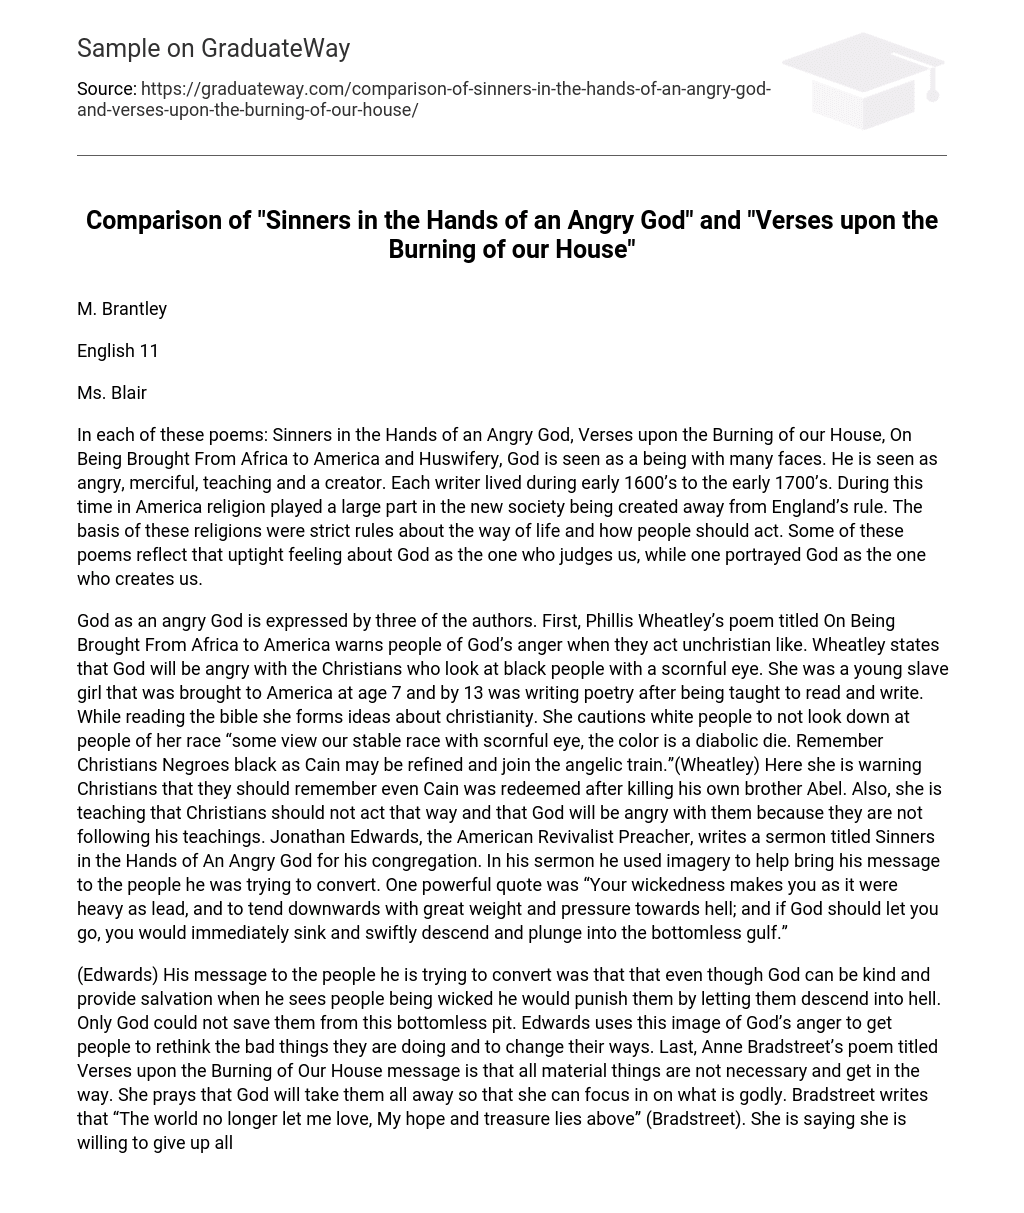 Comparison of “Sinners in the Hands of an Angry God” and “Verses upon the Burning of our House”